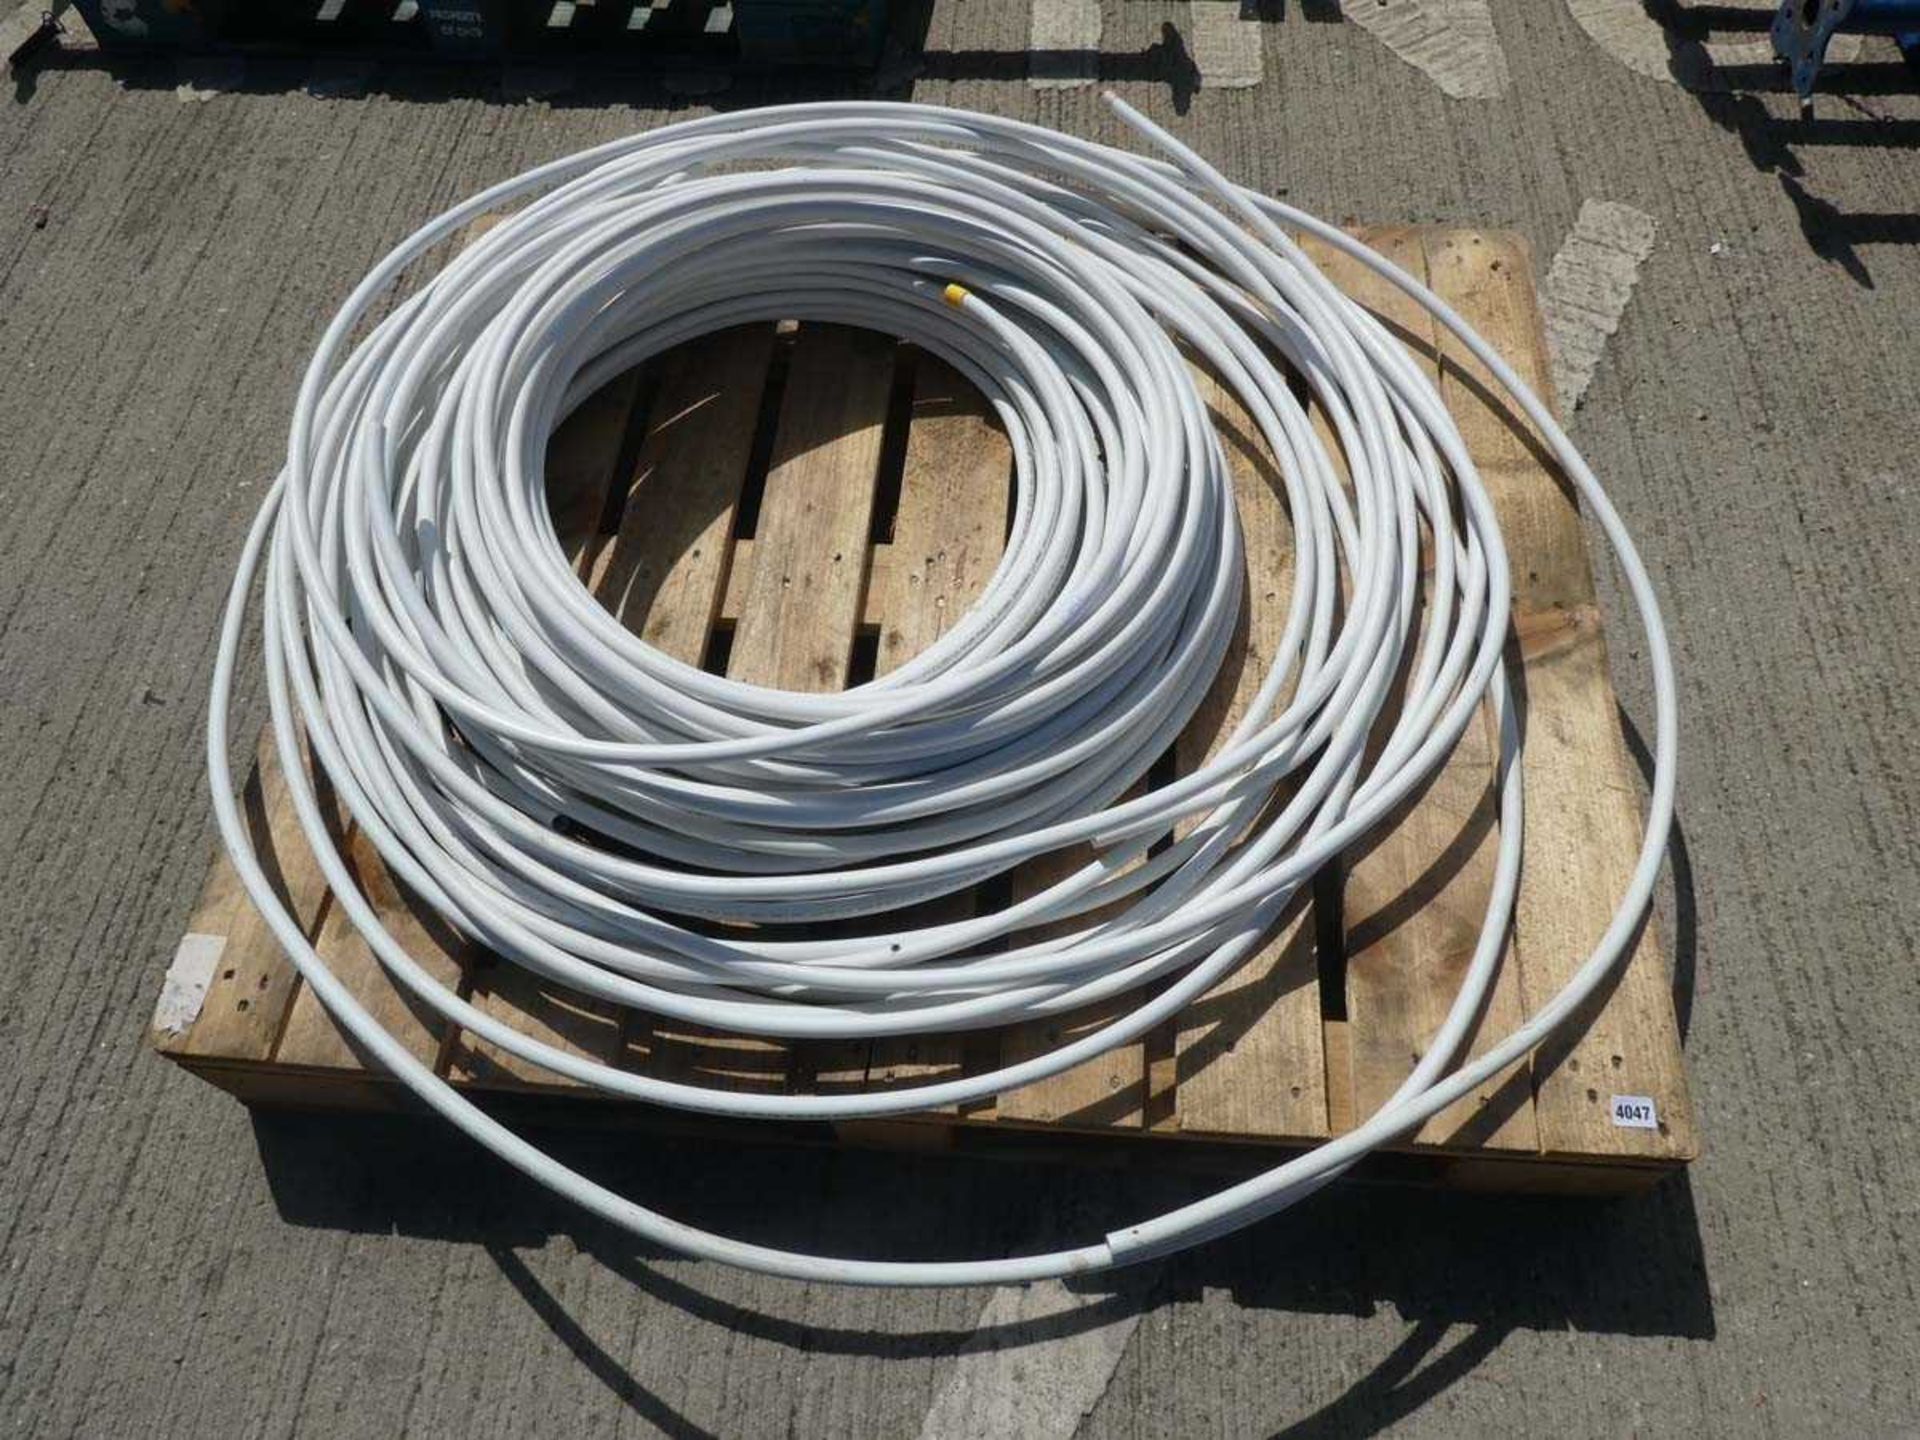 Pallet containing a large quantity of white plastic pipe